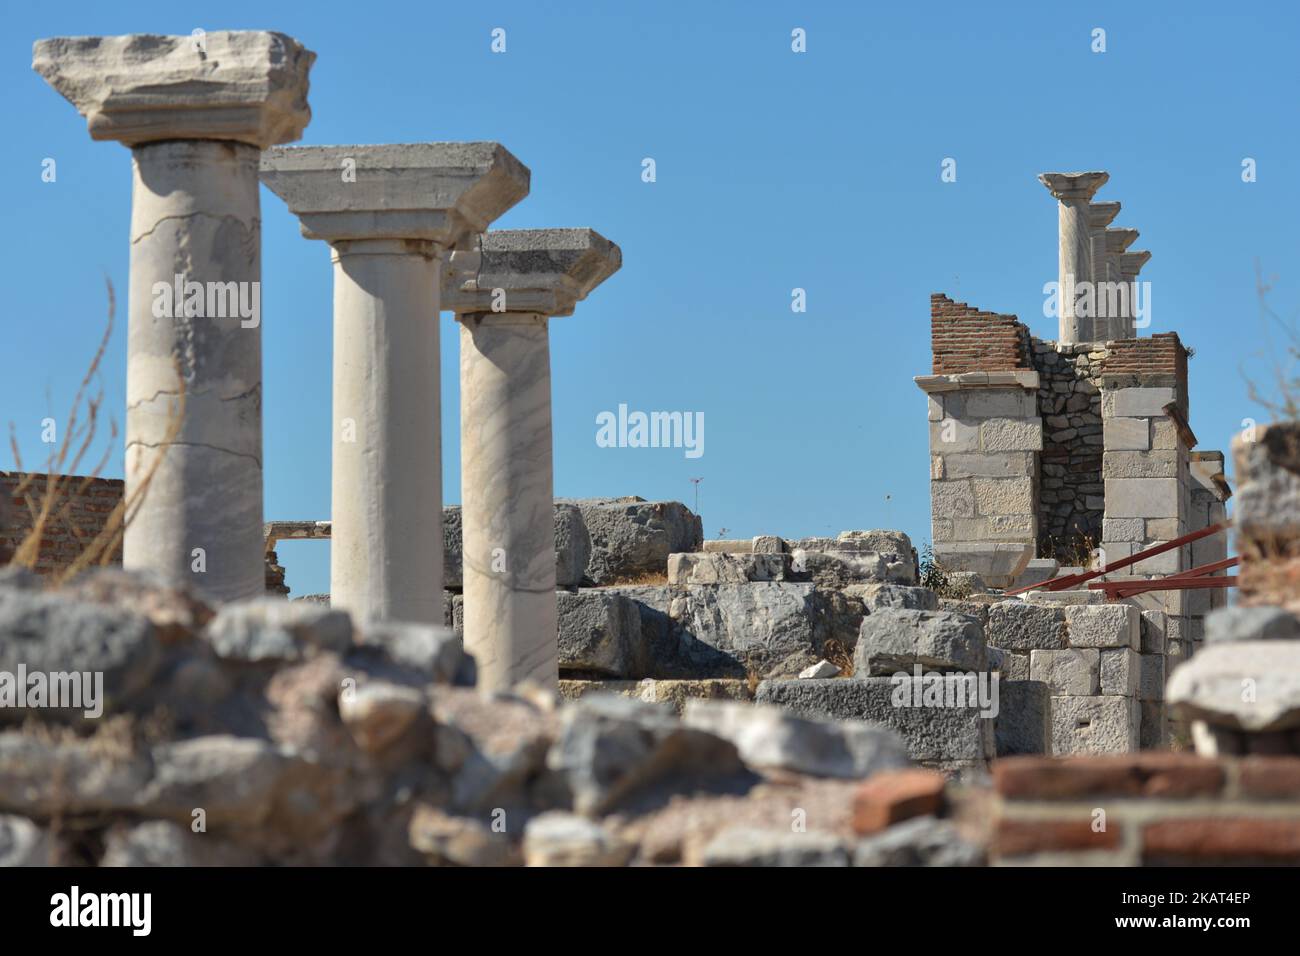 Ruins of the Basilica of St. John. The basilica stands over the believed burial site of John the Apostle, on the slopes of Ayasuluk Hill just below the fortress near the center of Selcuk. On Friday, 13 October 2017, in Selcuk, Turkey. (Photo by Artur Widak/NurPhoto)  Stock Photo